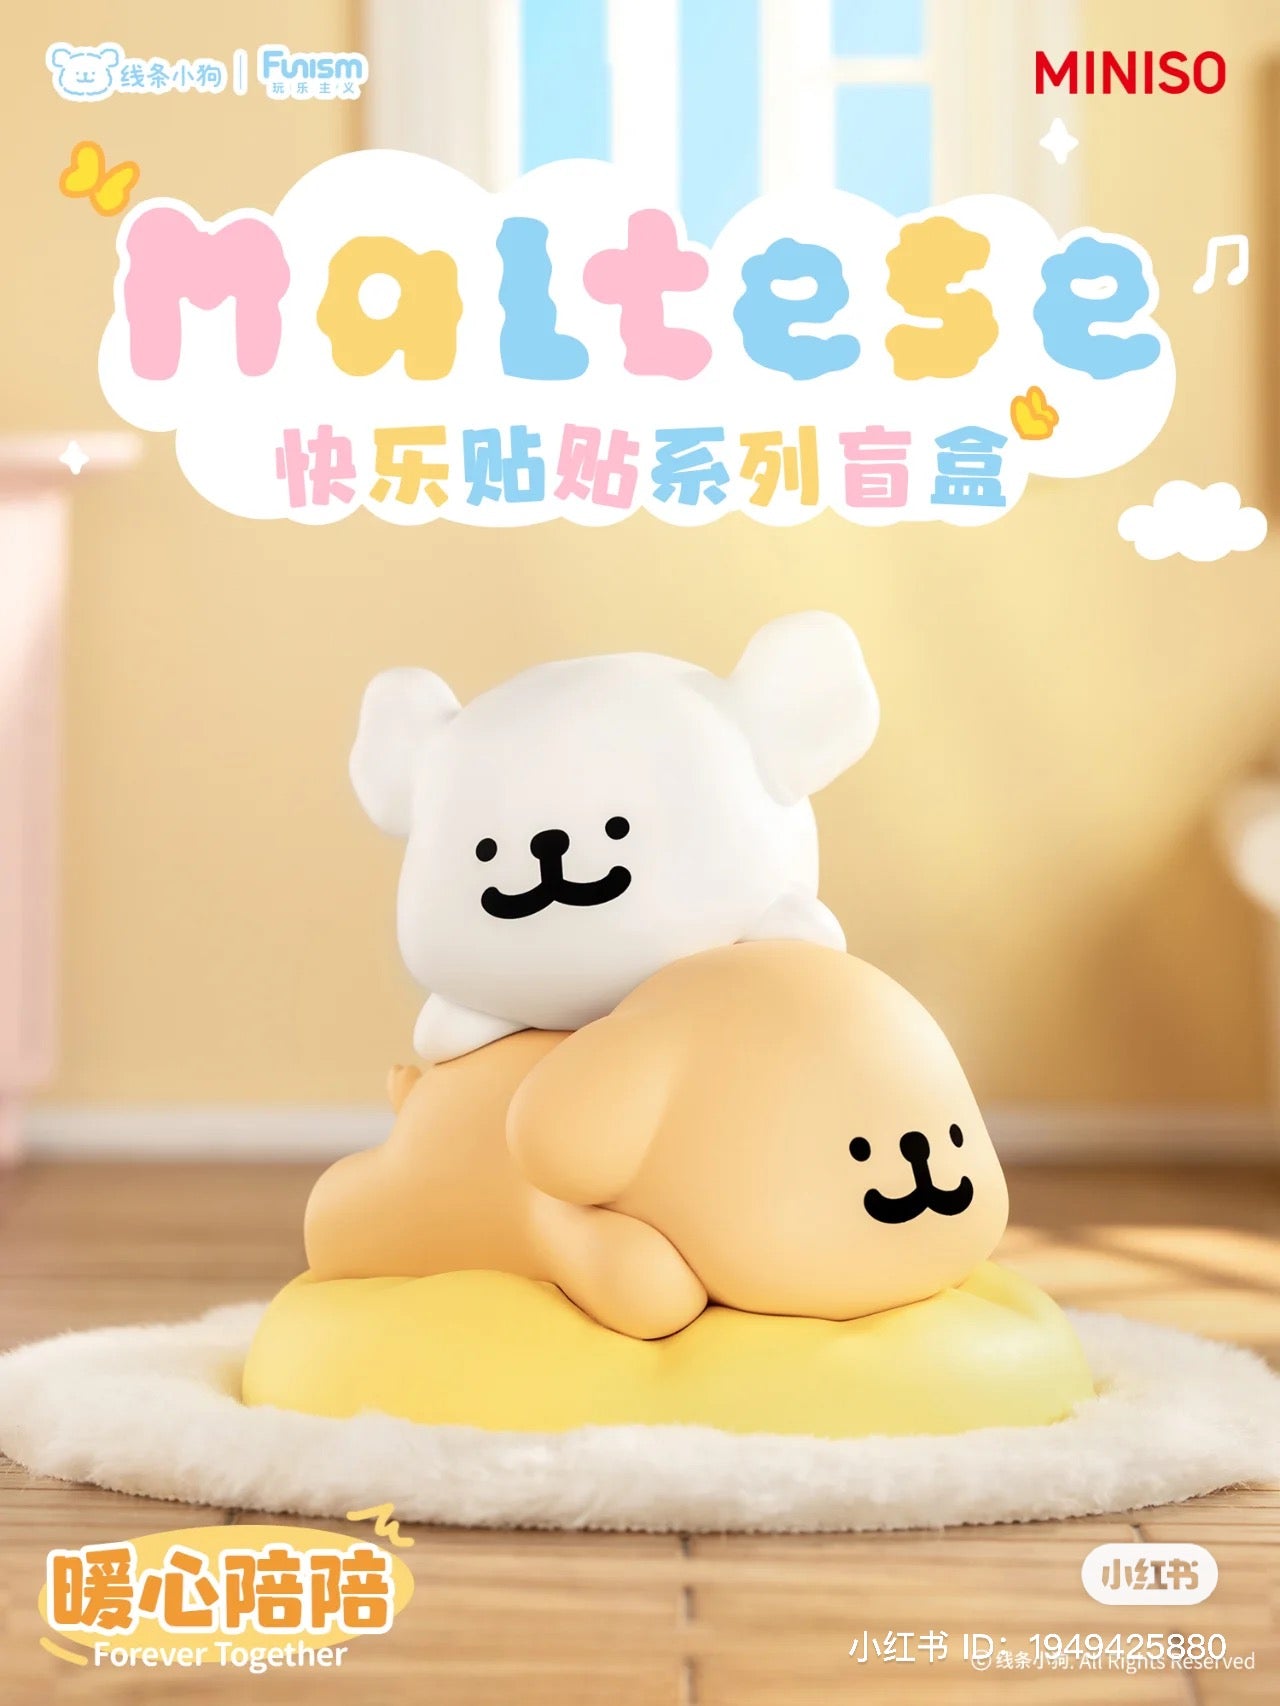 A blind box series featuring Maltese Happy Snuggling figurines. Includes 6 regular designs and 1 secret variant. From Strangecat Toys, a blind box and art toy store.